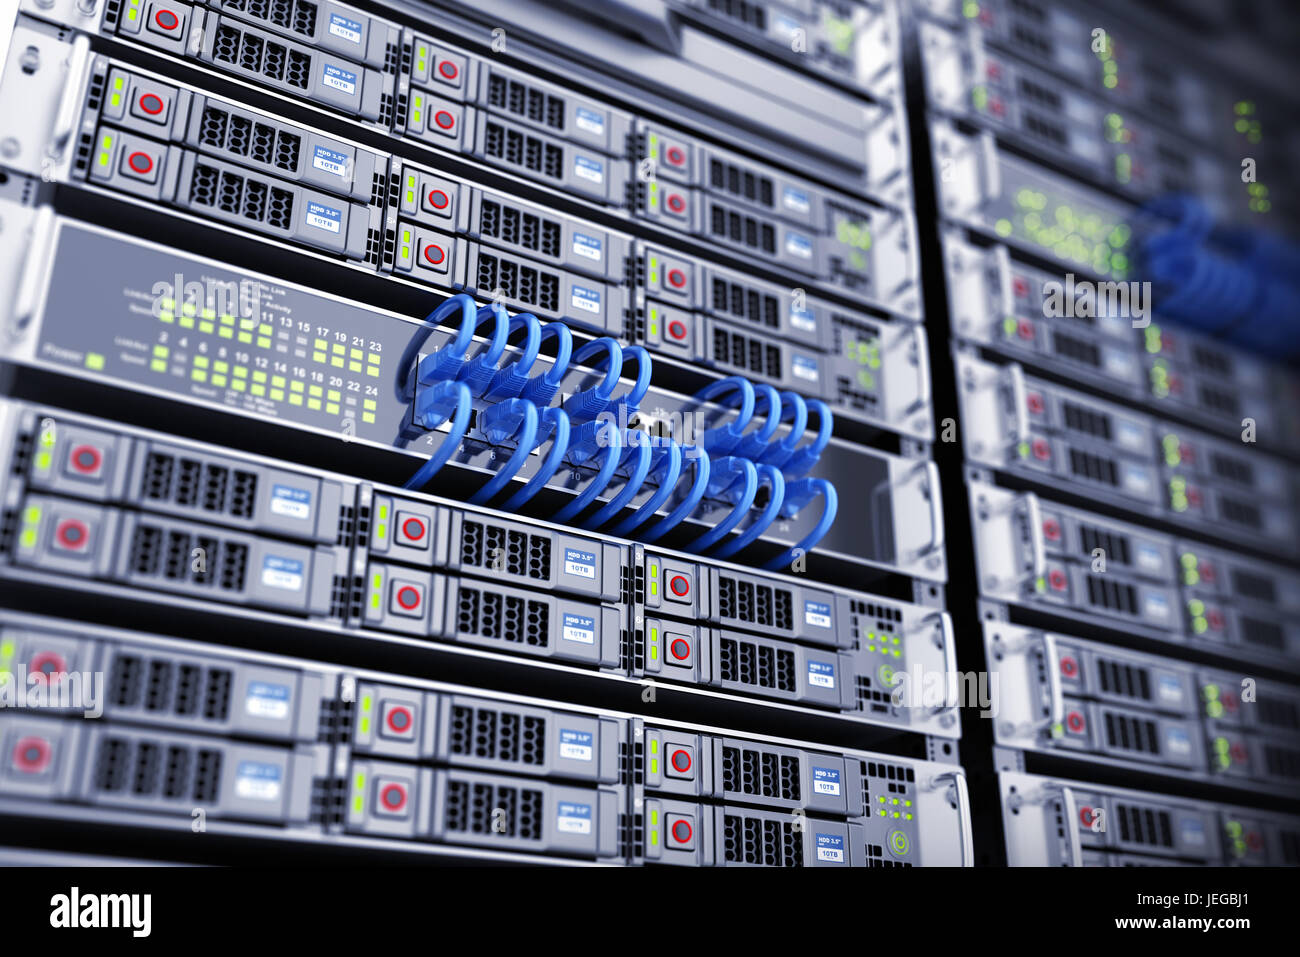 Database and connect server. 3d illustration Stock Photo